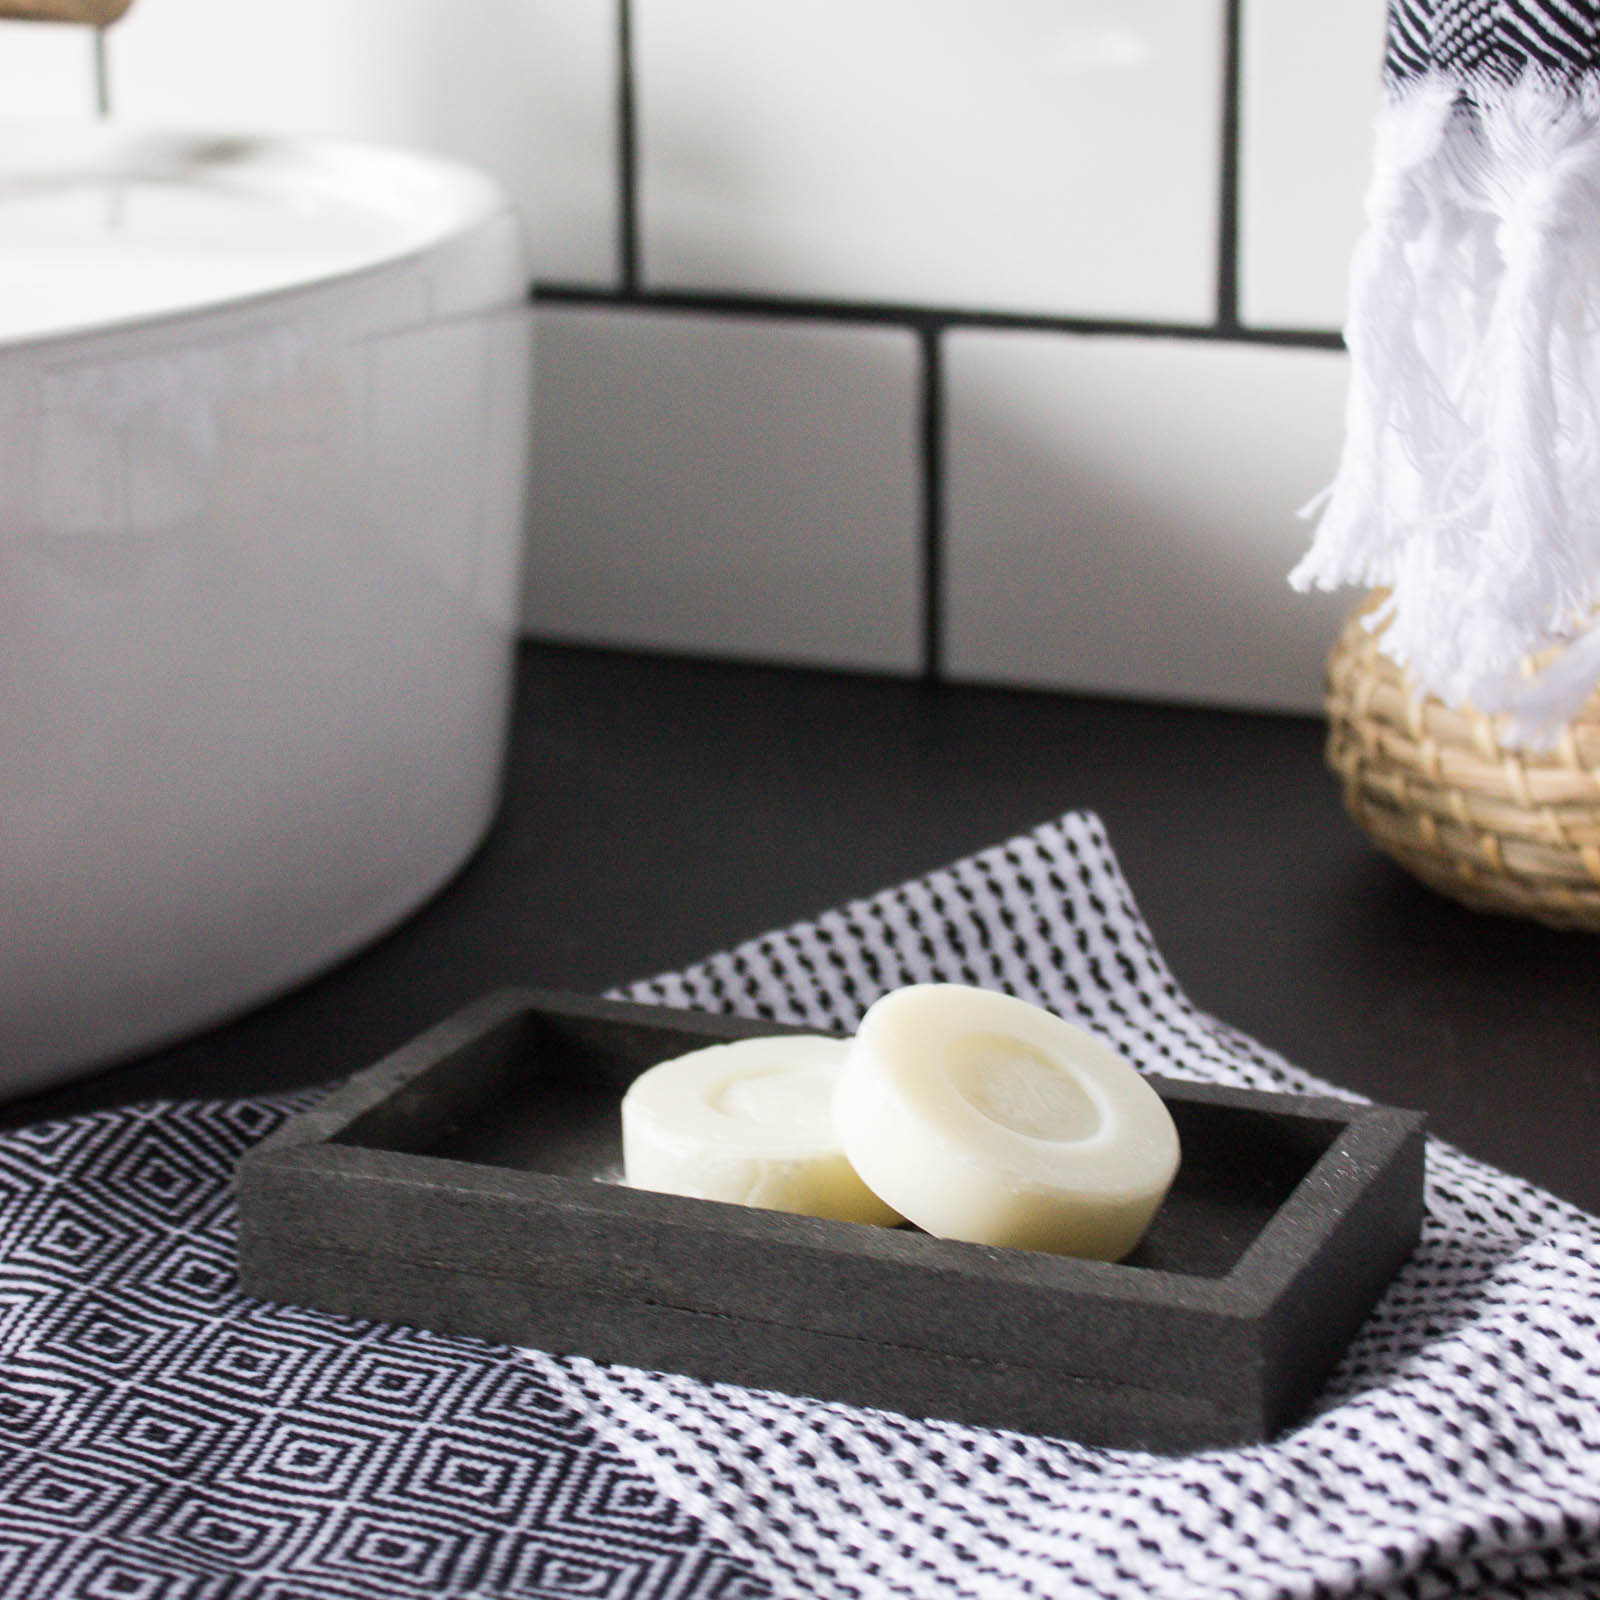 Sleek modern soap dish! Love this easy modern DIY using leftover tile! Love the chic and masculine feel to this modern DIY project on a budget. Looks amazing in this modern bathroom! #budgetfriendly #modernbathroom #basalt #leftovertile #makeover